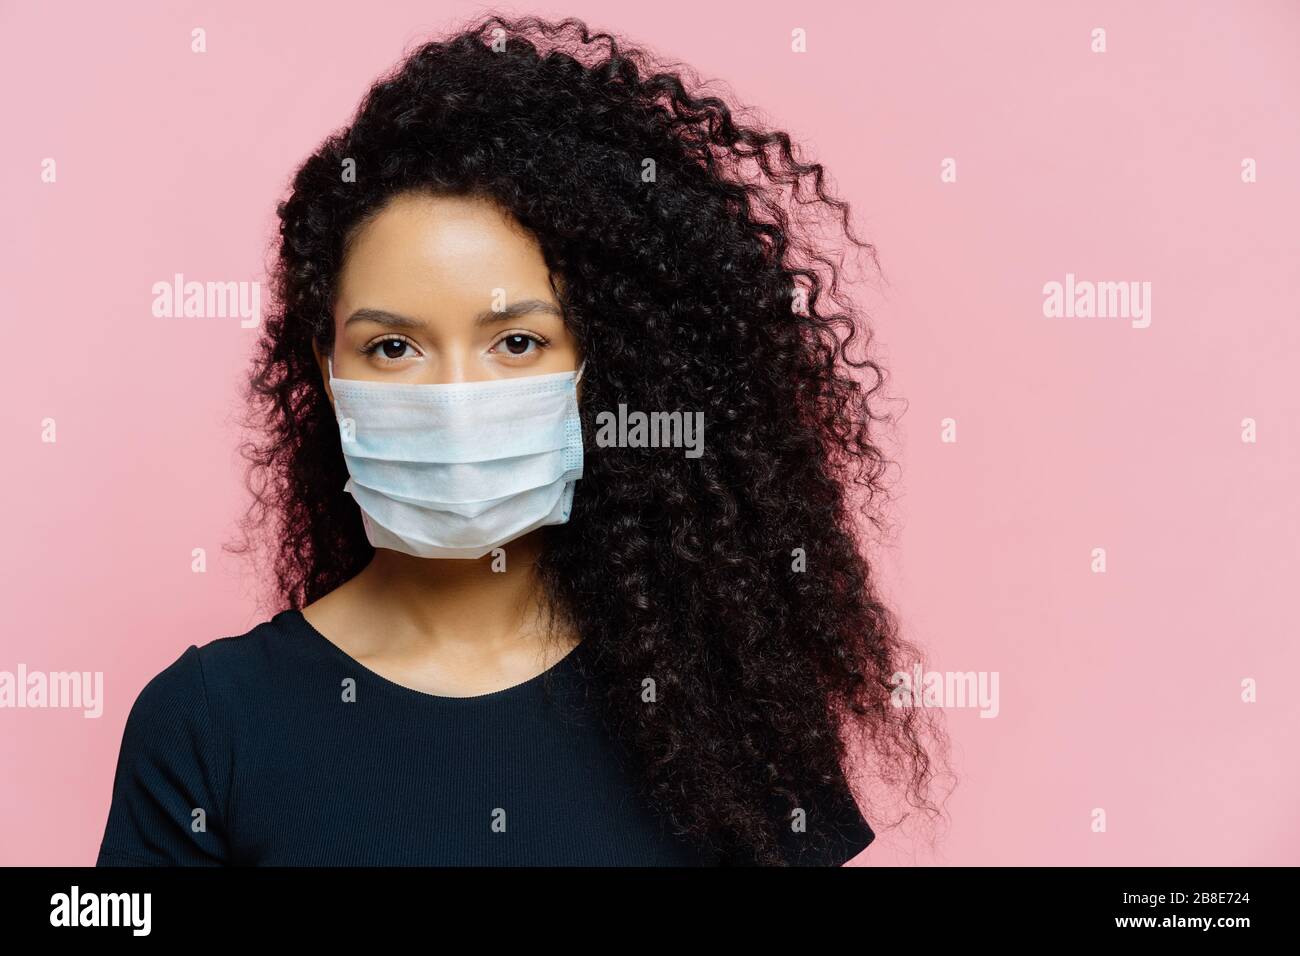 Serious dark skinned young woman being on self isolation at home, wears protective medical mask, being on quarantine at home, dressed casually, poses Stock Photo